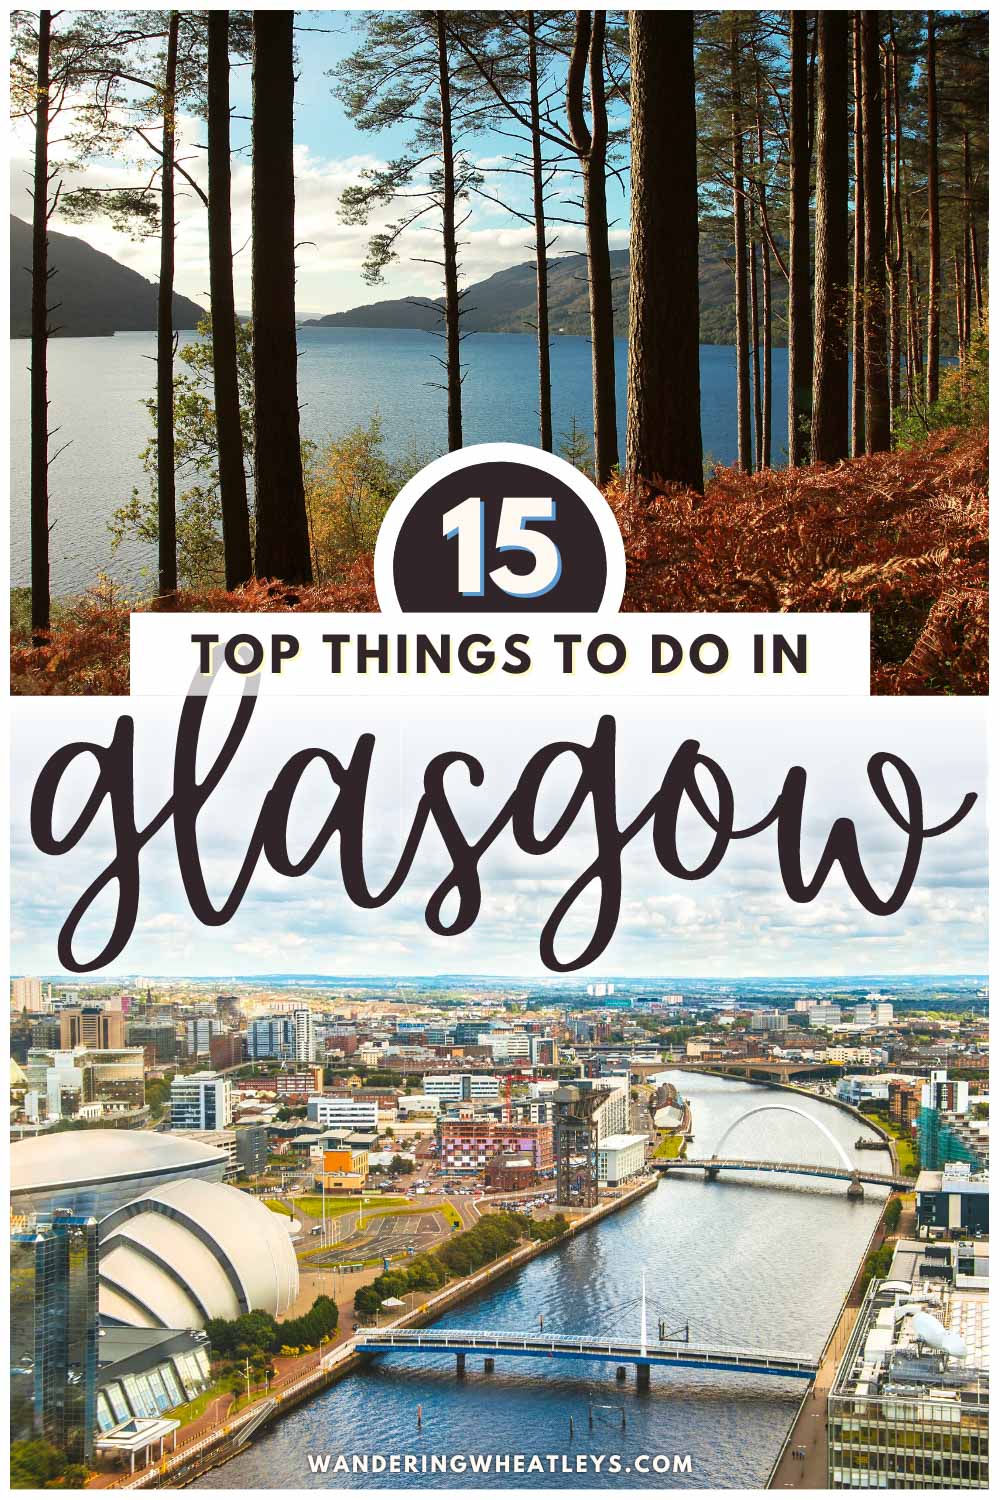 The Best Things to do in Glasgow, Scotland